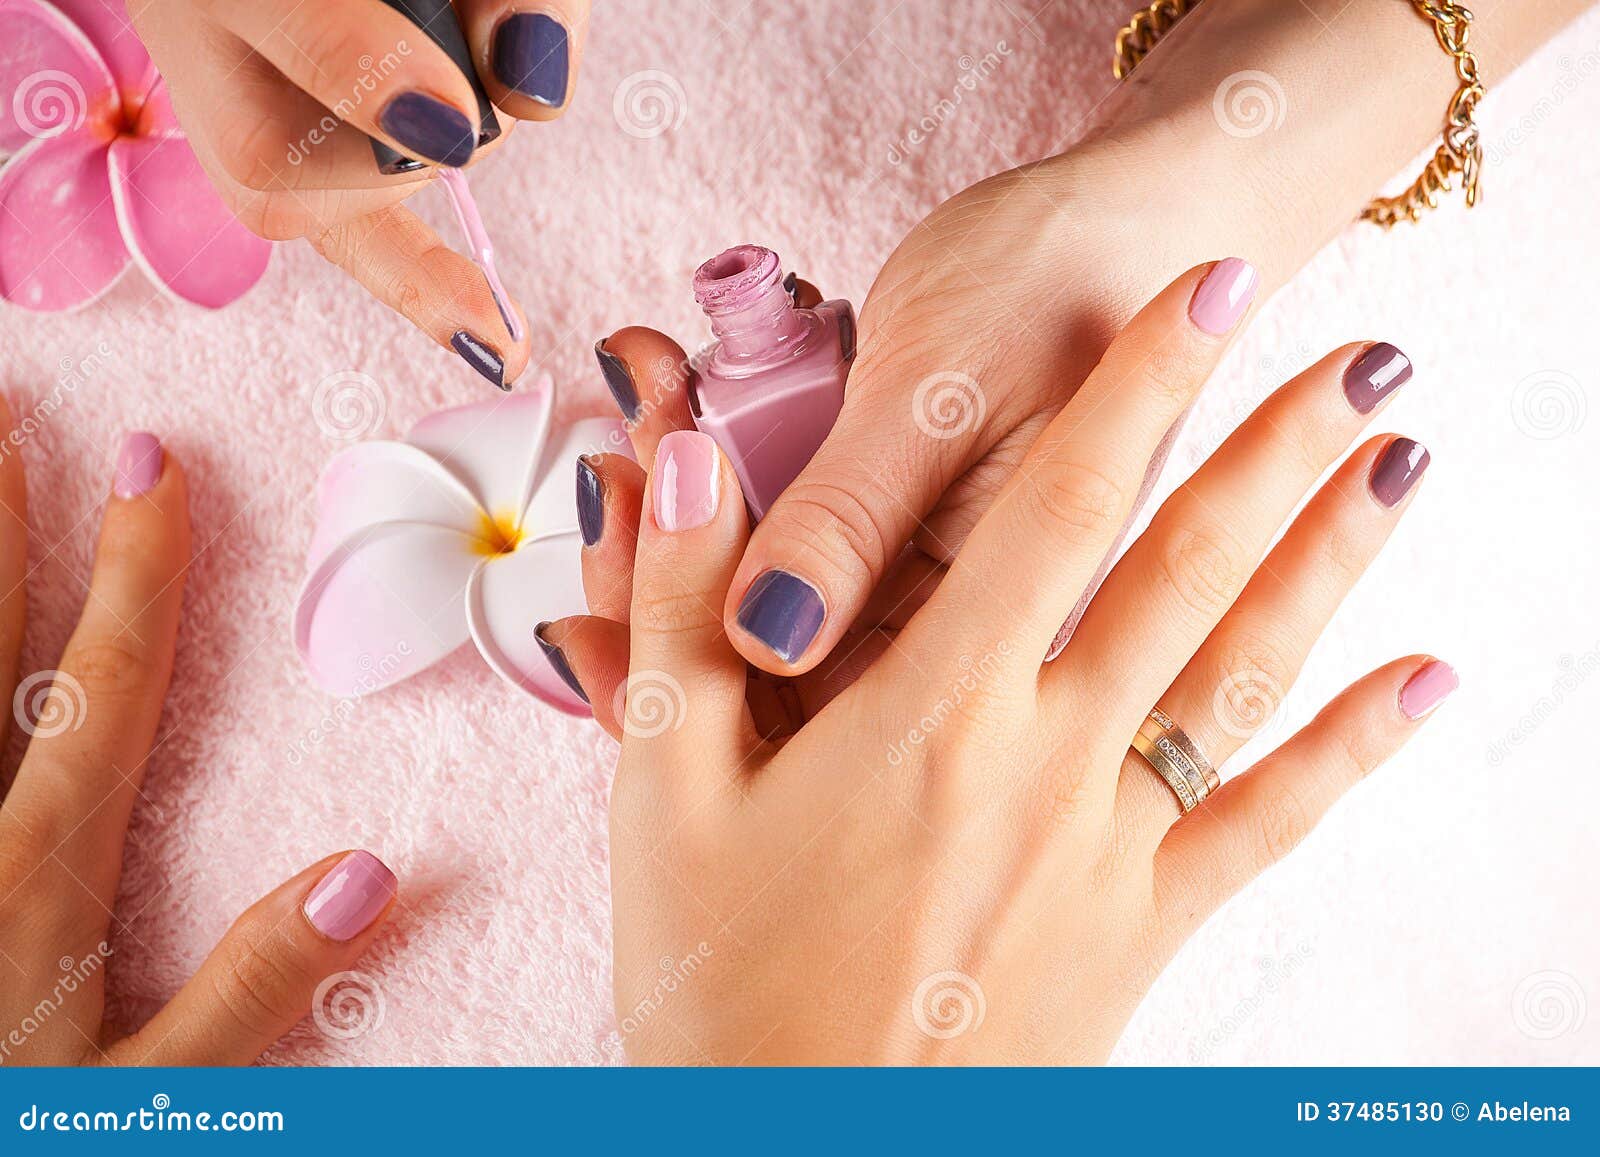 Woman receiving a manicure stock photo. Image of nail - 37485130